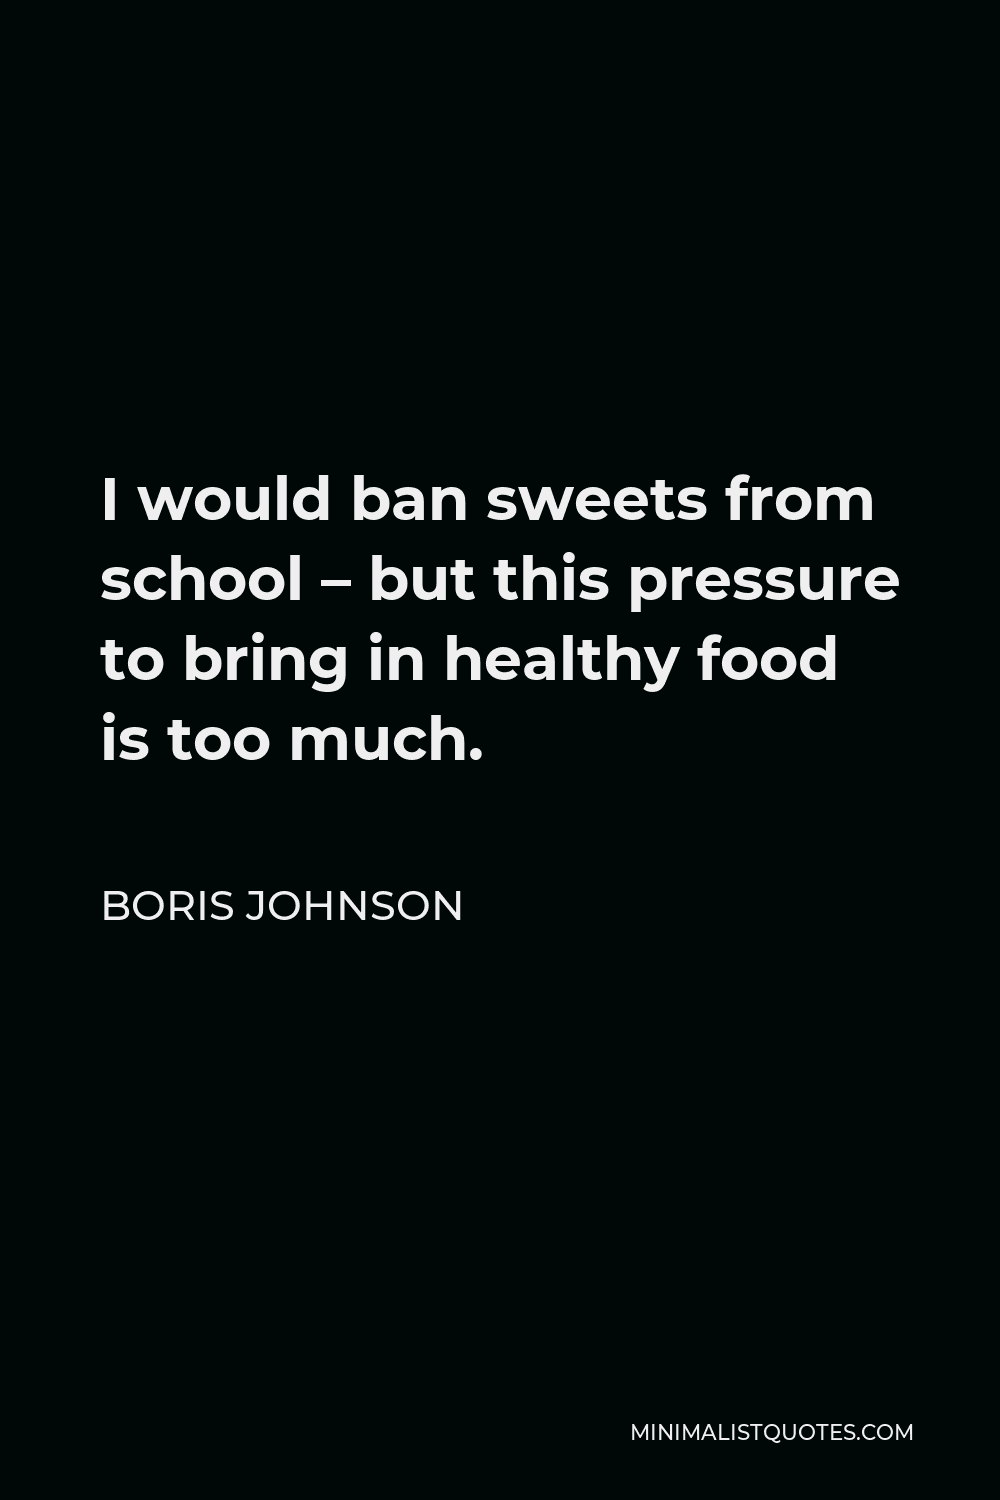 Boris Johnson Quote - I would ban sweets from school – but this pressure to bring in healthy food is too much.